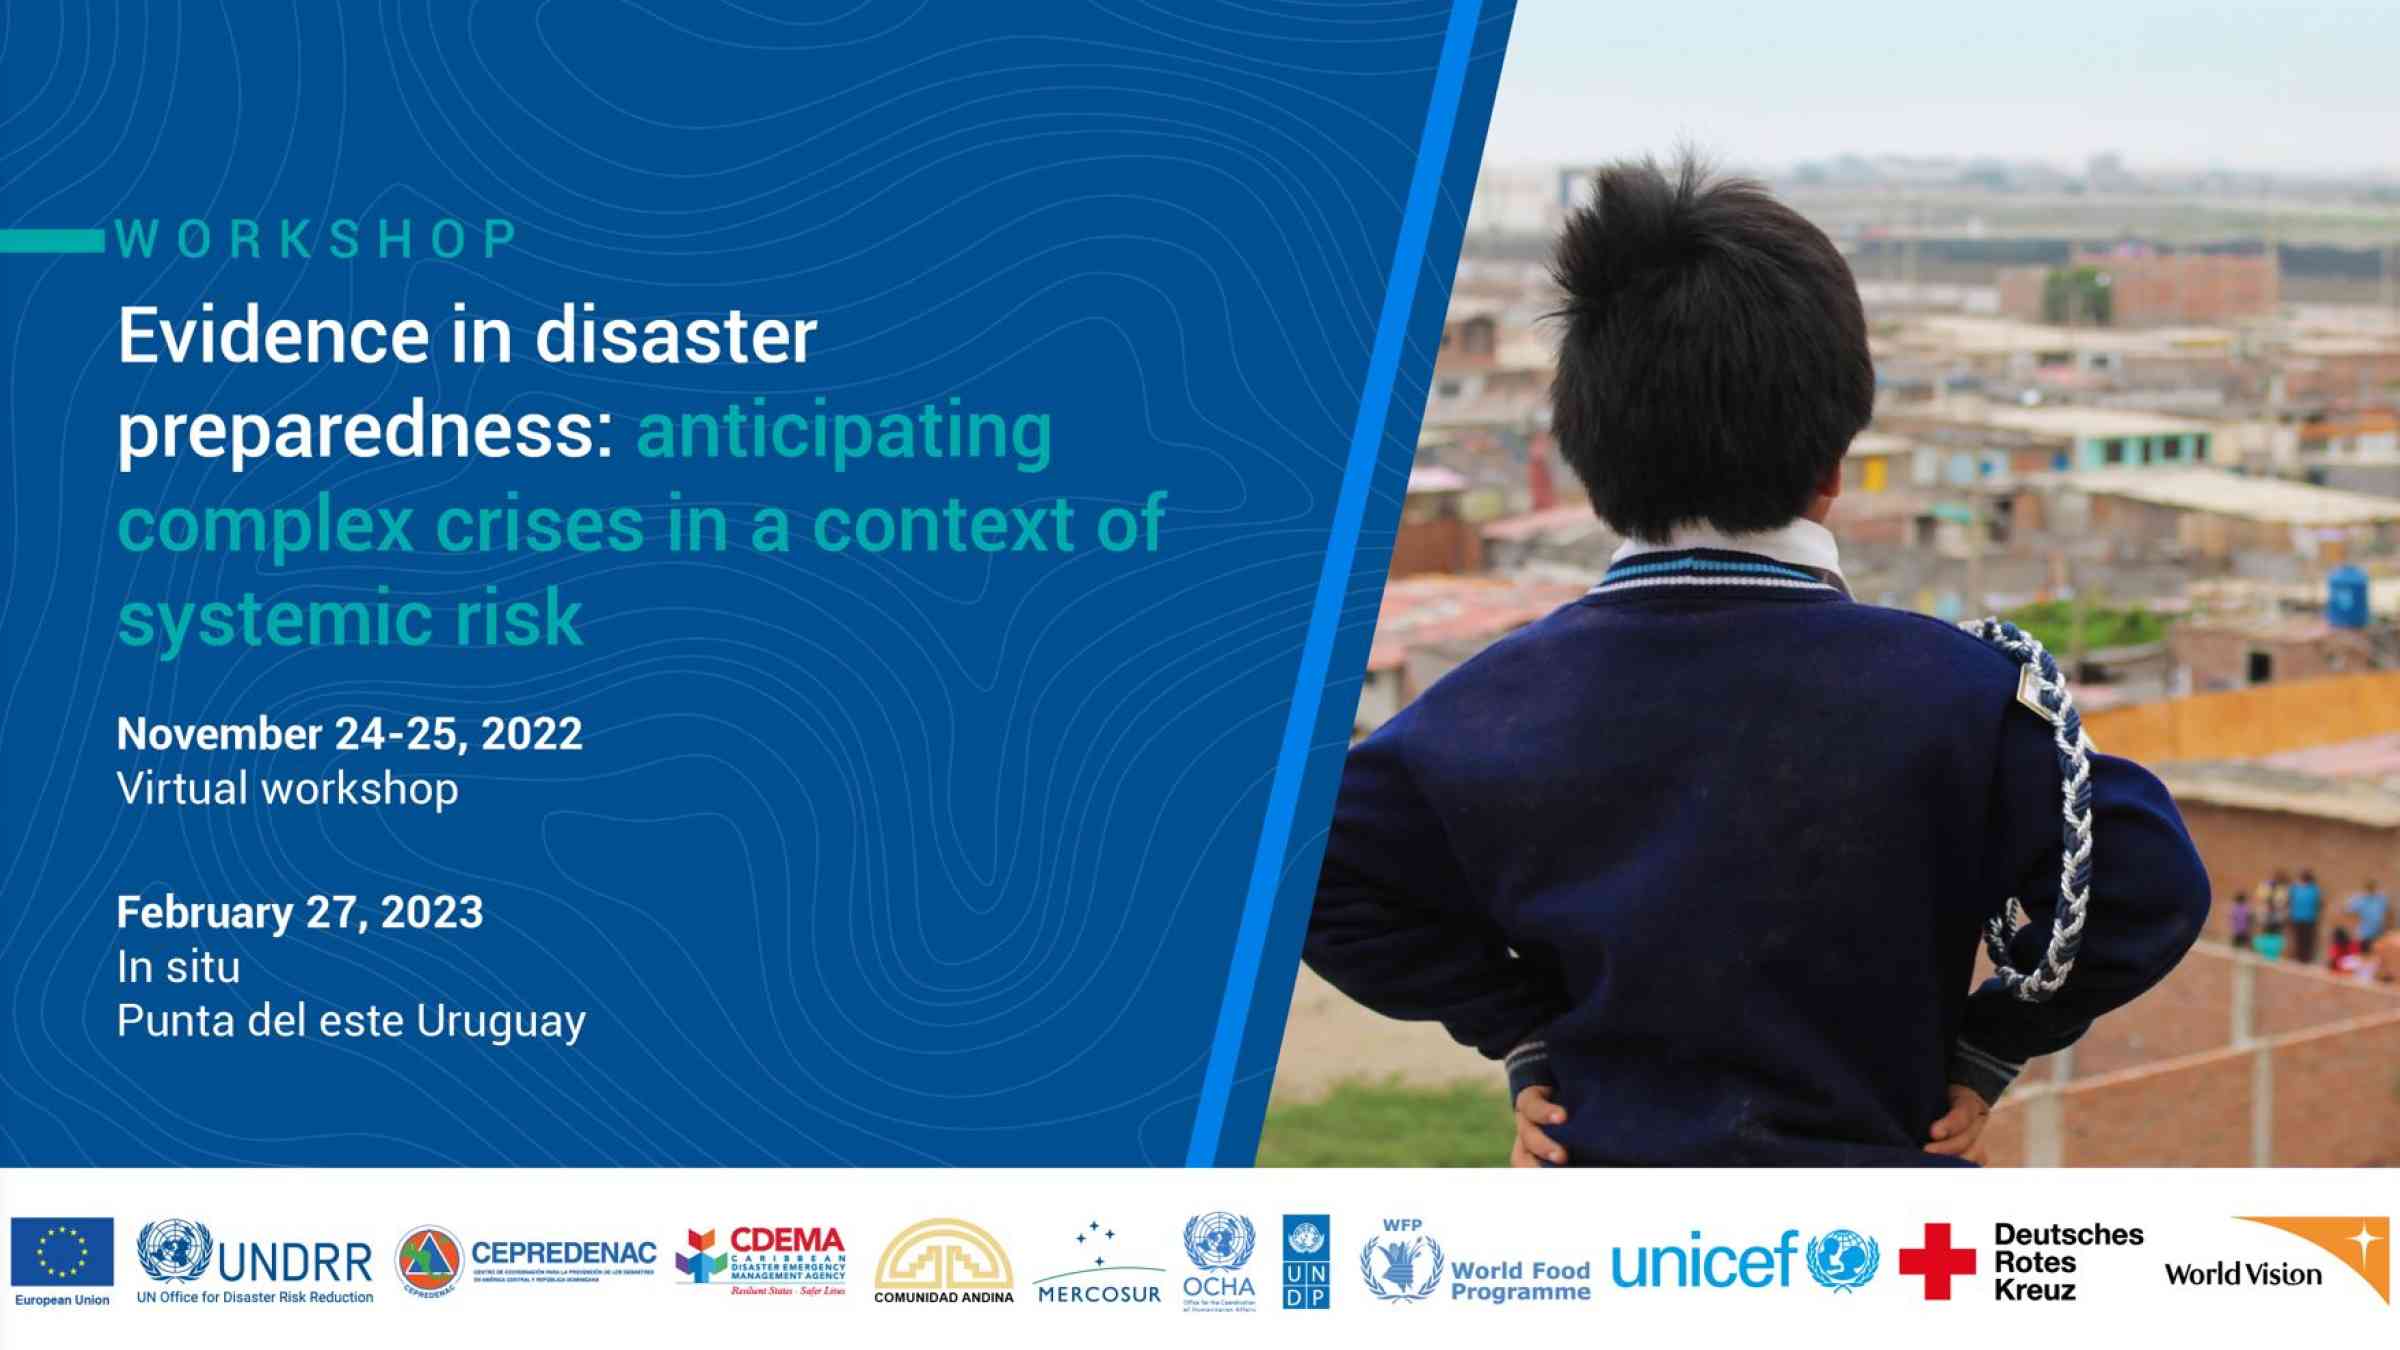 Evidence in disaster preparedness: anticipating complex crises in a context of systemic risk